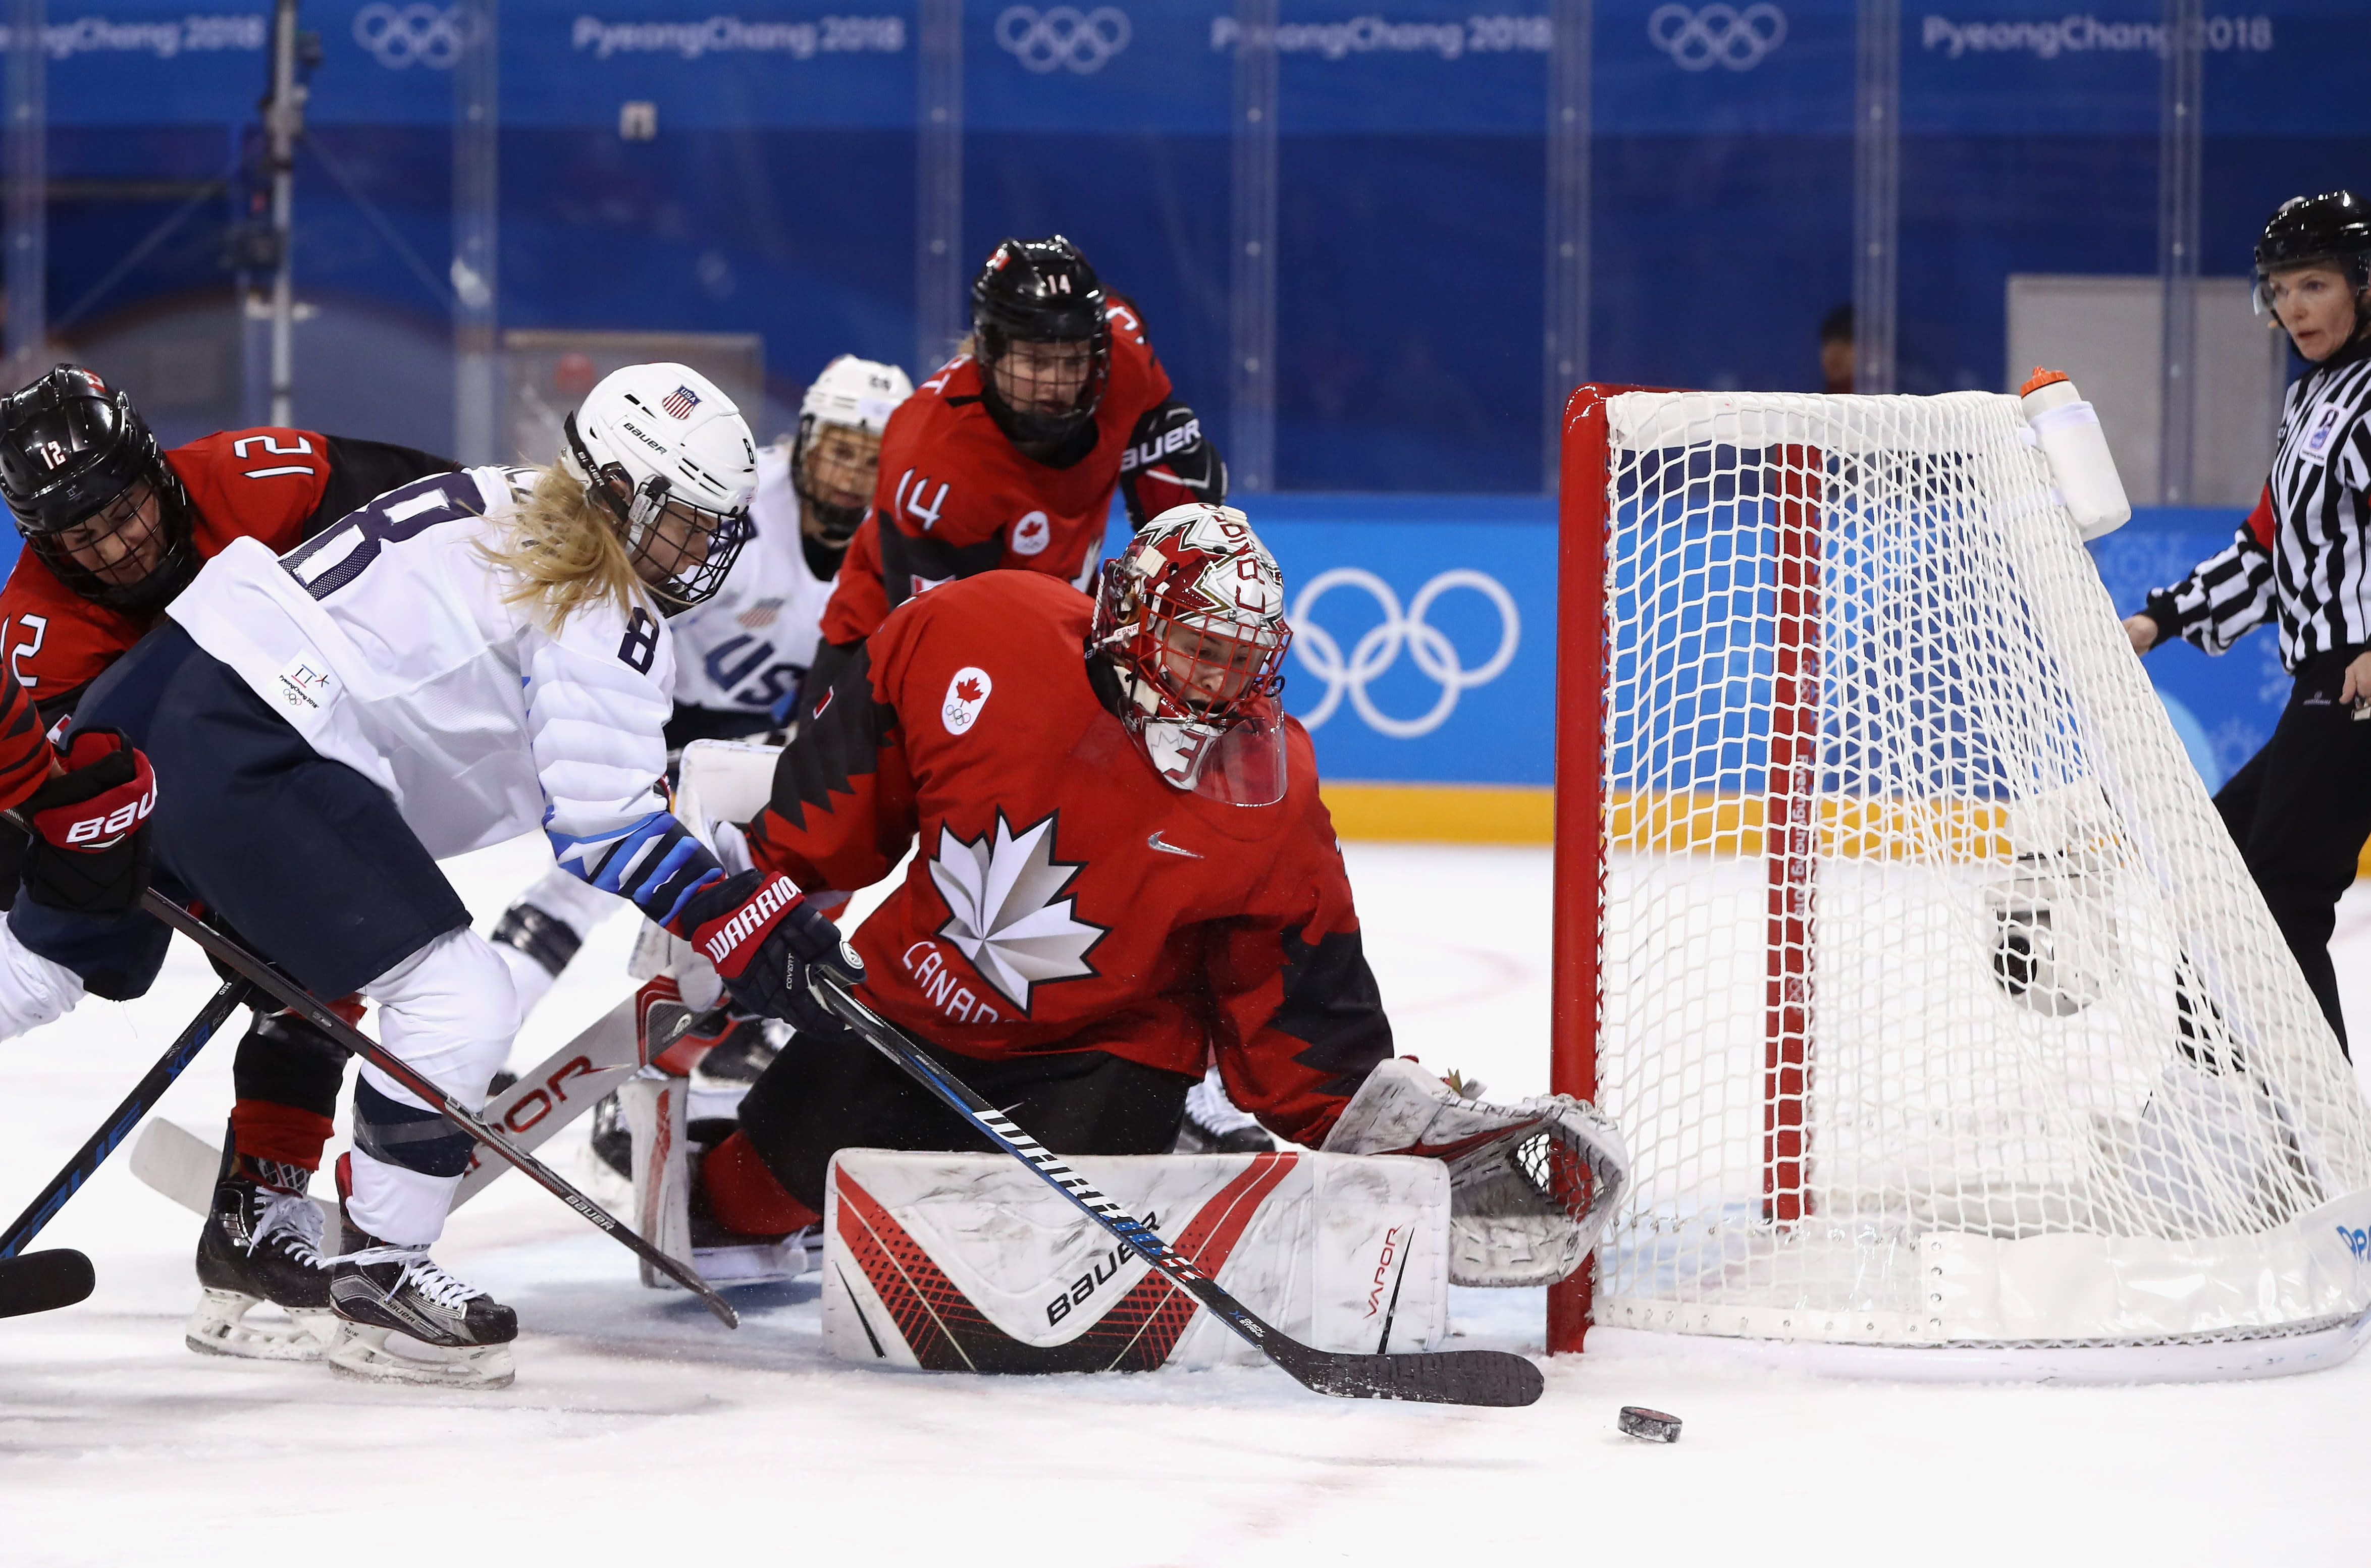 The Legacy of This U.S. Women's Hockey Team Is Already Secure